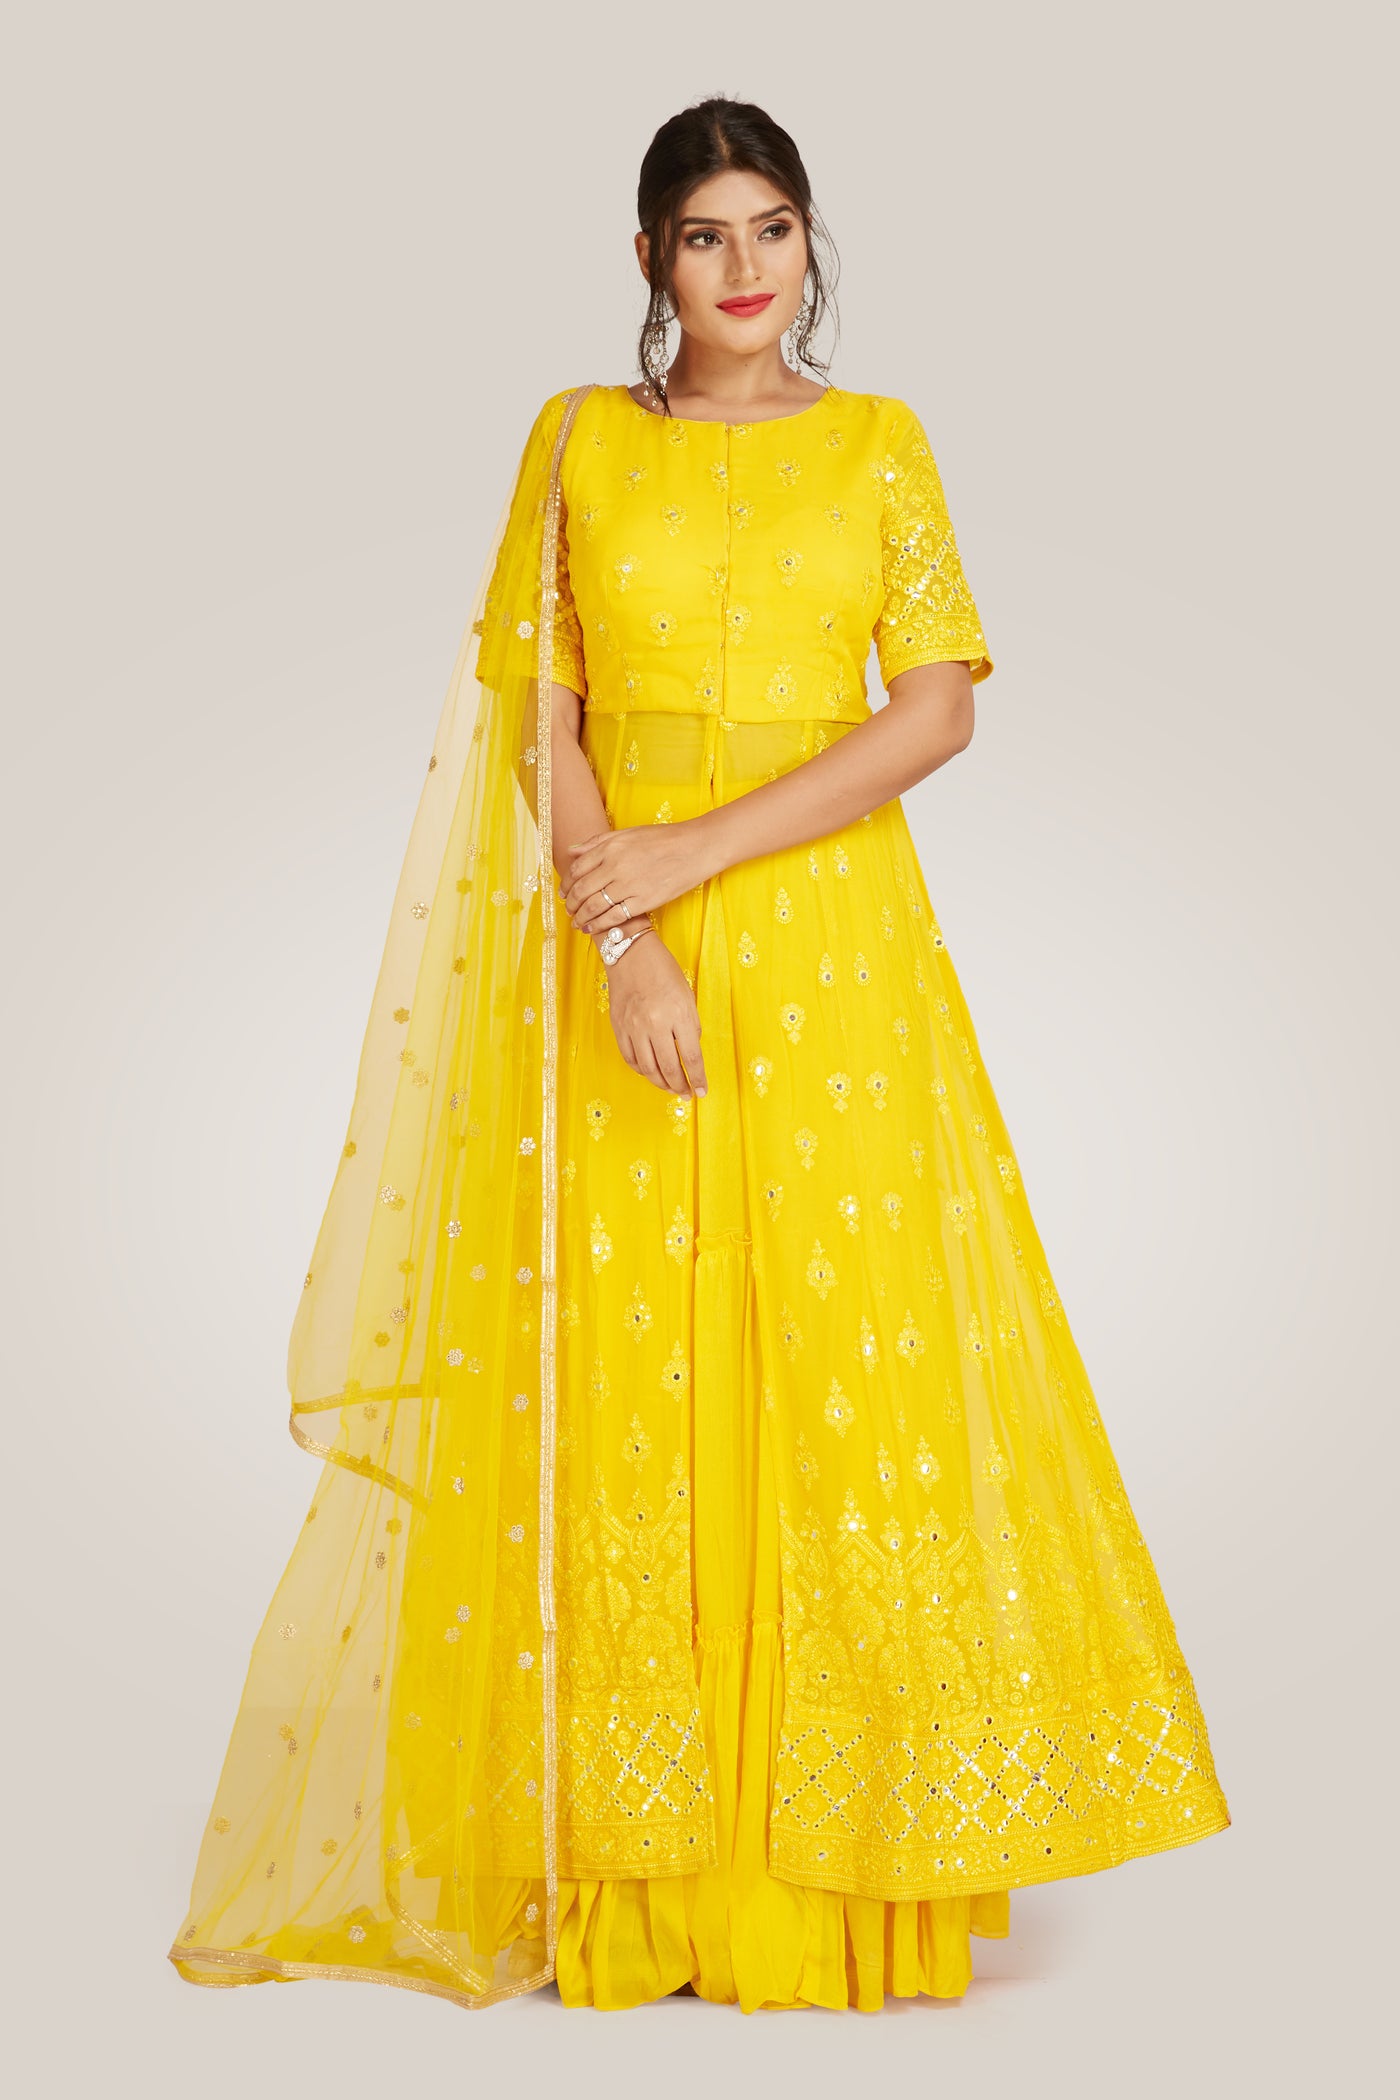 Yellow Palazzo Set - Indian Clothing in Denver, CO, Aurora, CO, Boulder, CO, Fort Collins, CO, Colorado Springs, CO, Parker, CO, Highlands Ranch, CO, Cherry Creek, CO, Centennial, CO, and Longmont, CO. Nationwide shipping USA - India Fashion X